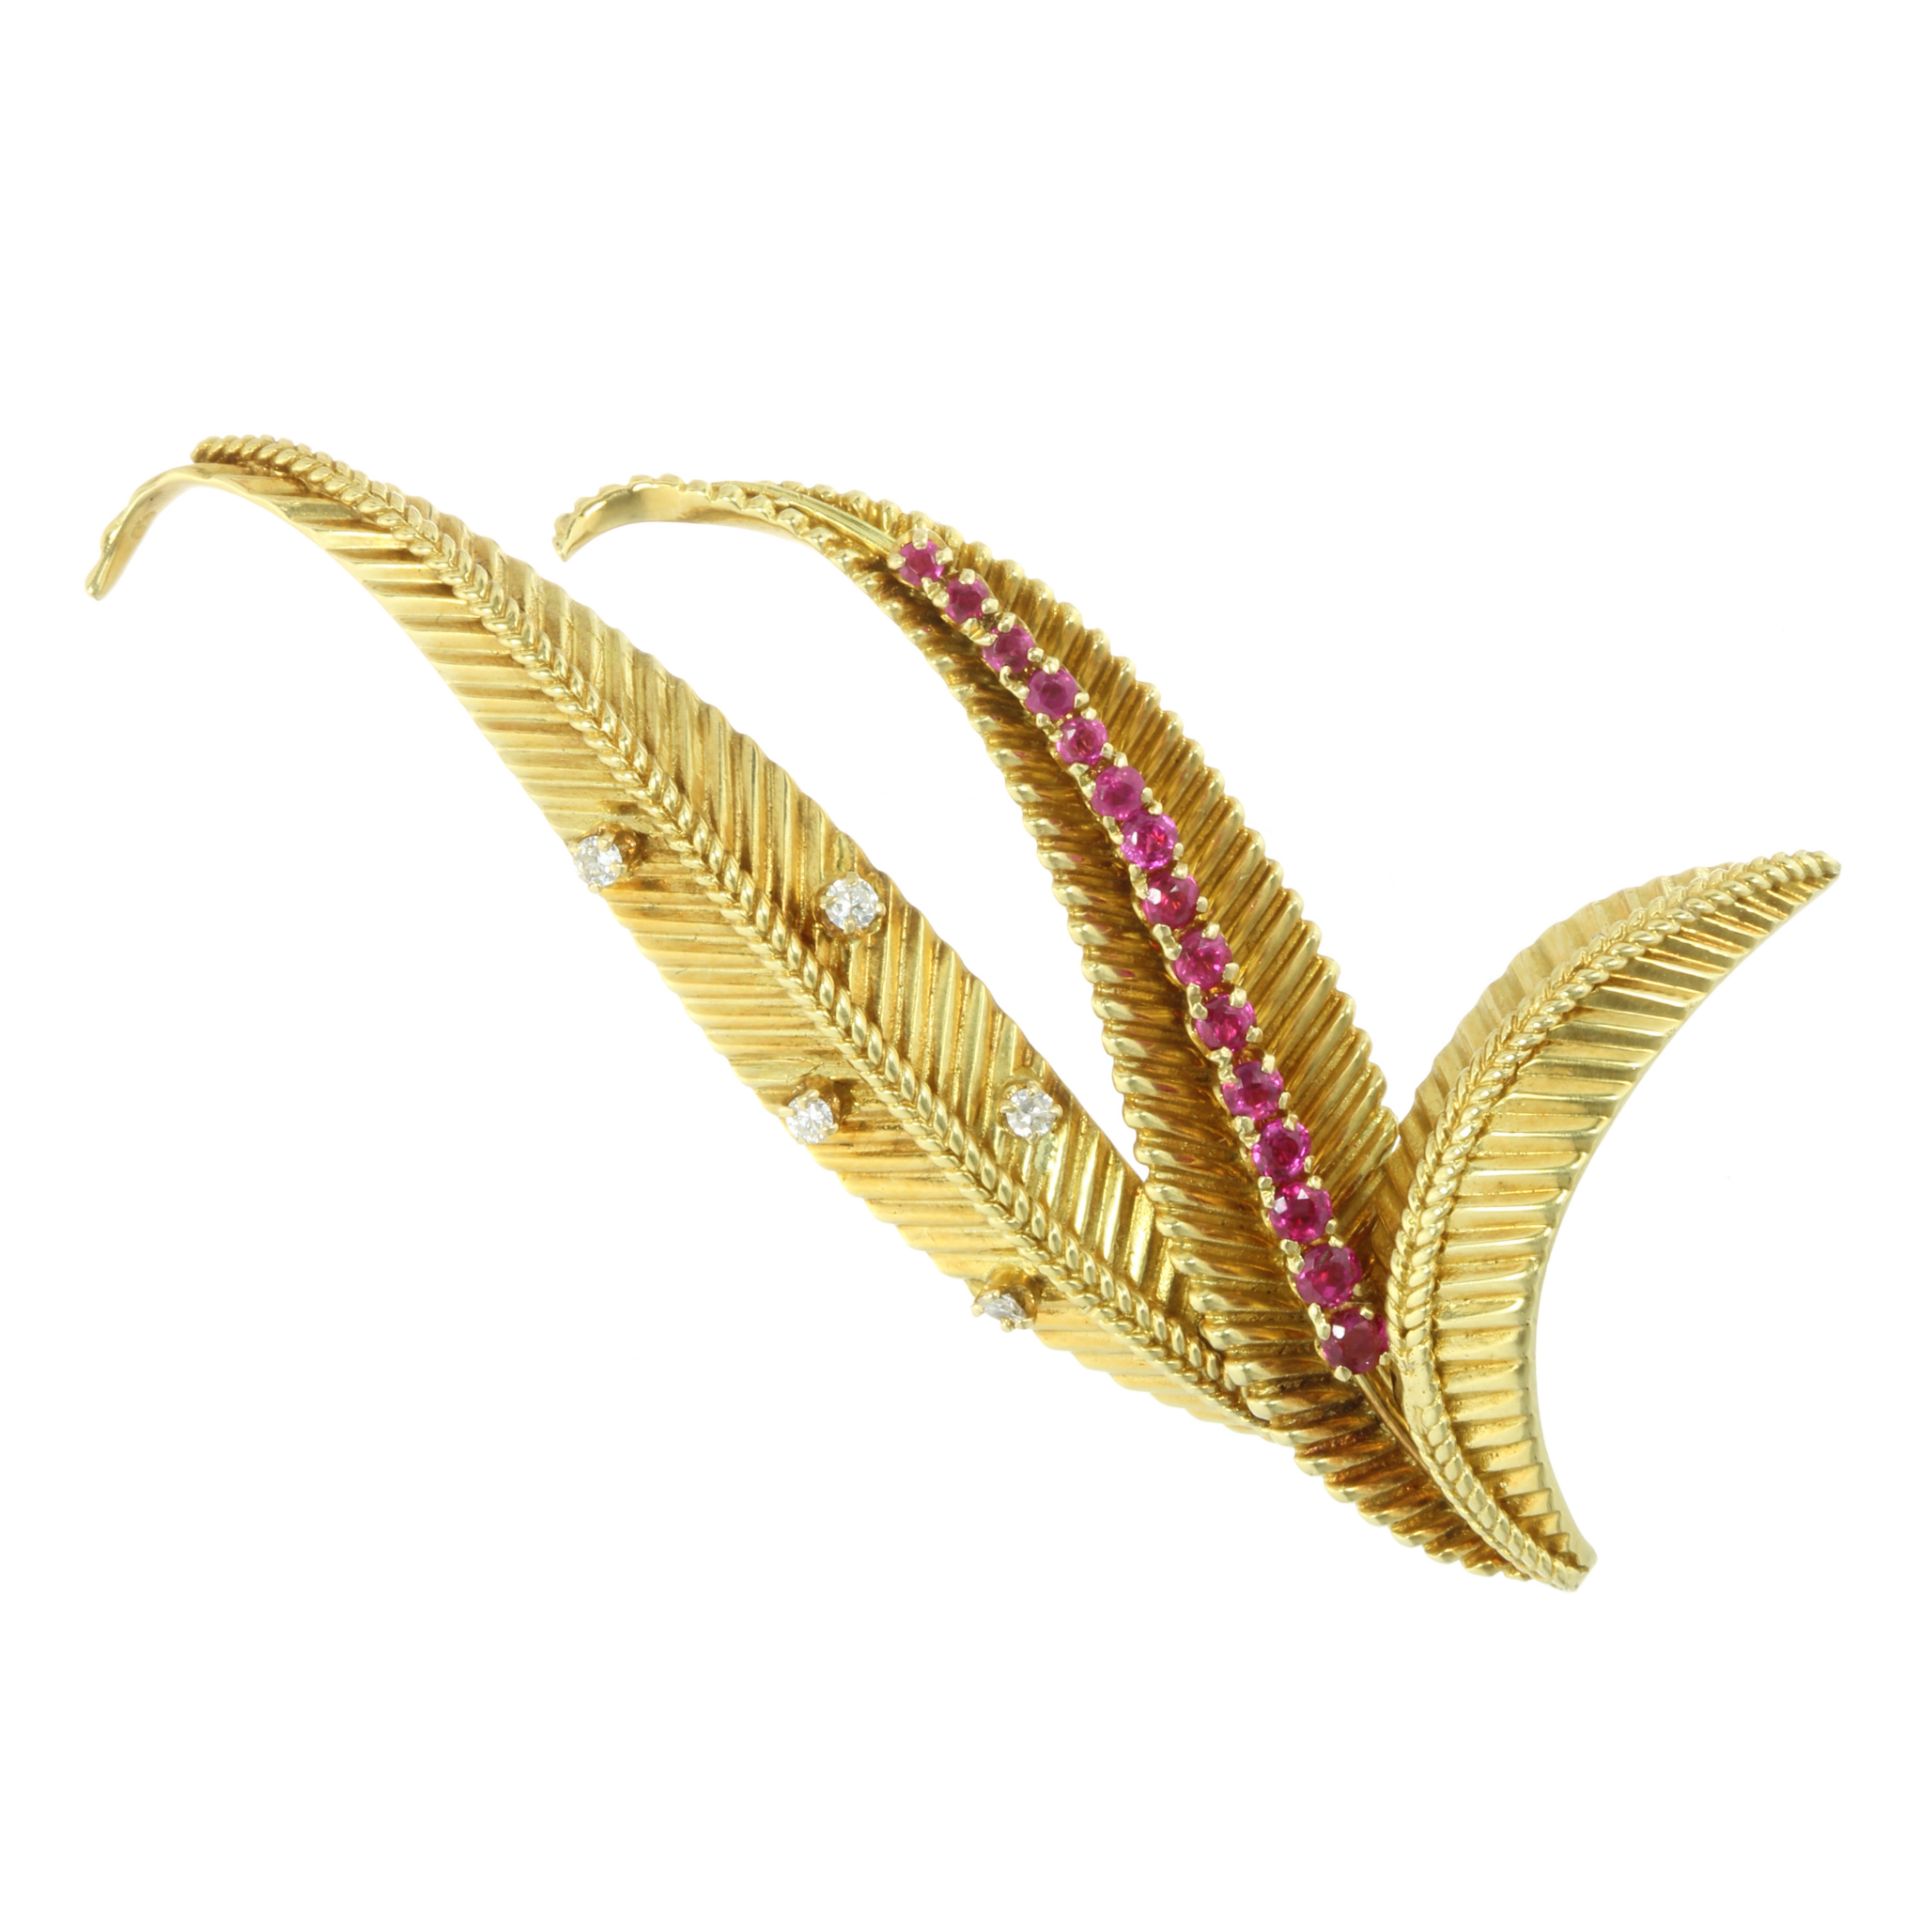 A VINTAGE RUBY AND DIAMOND FLORAL SPRAY BROOCH, 1961 in 18ct yellow gold, in the manner of Van Cleef